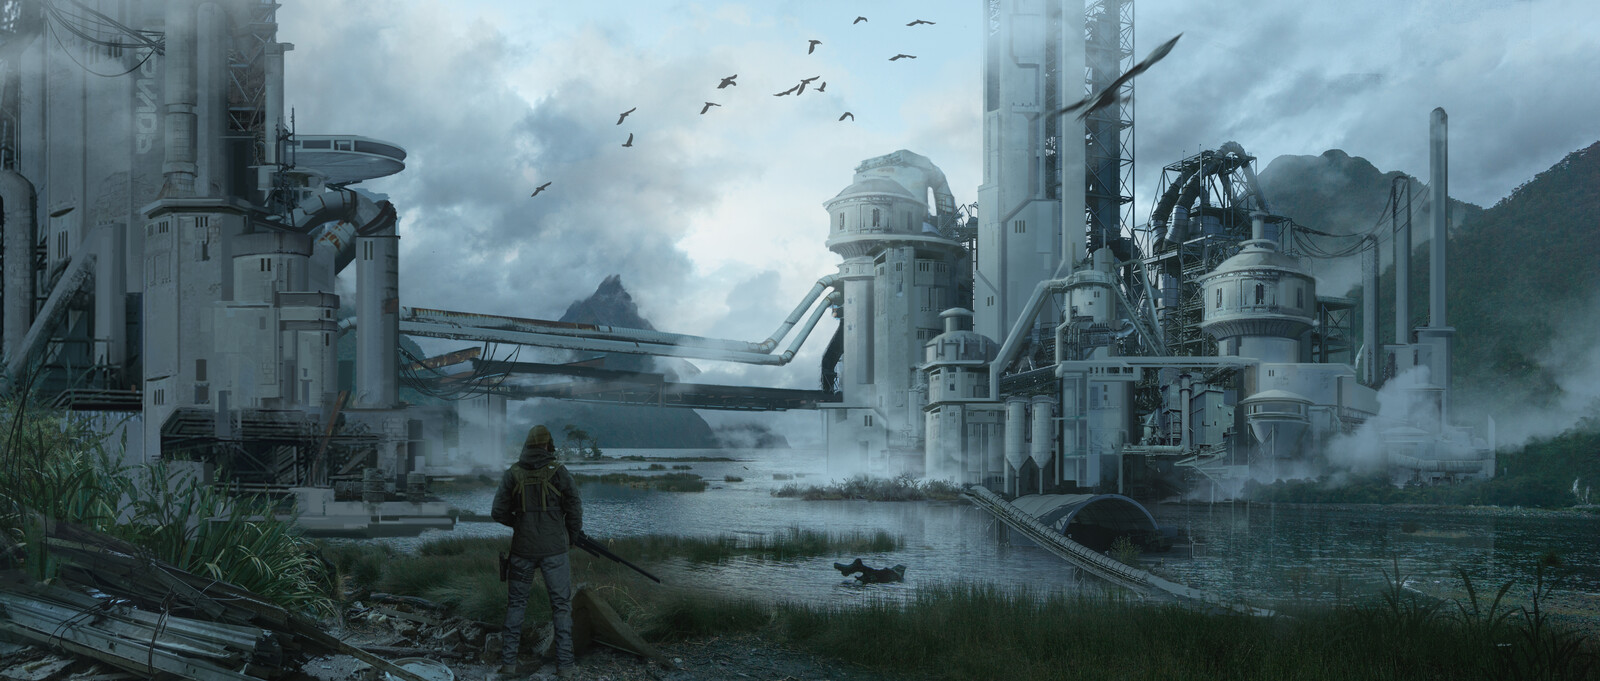 Environment concept art: the discovery of the fallen science lab base